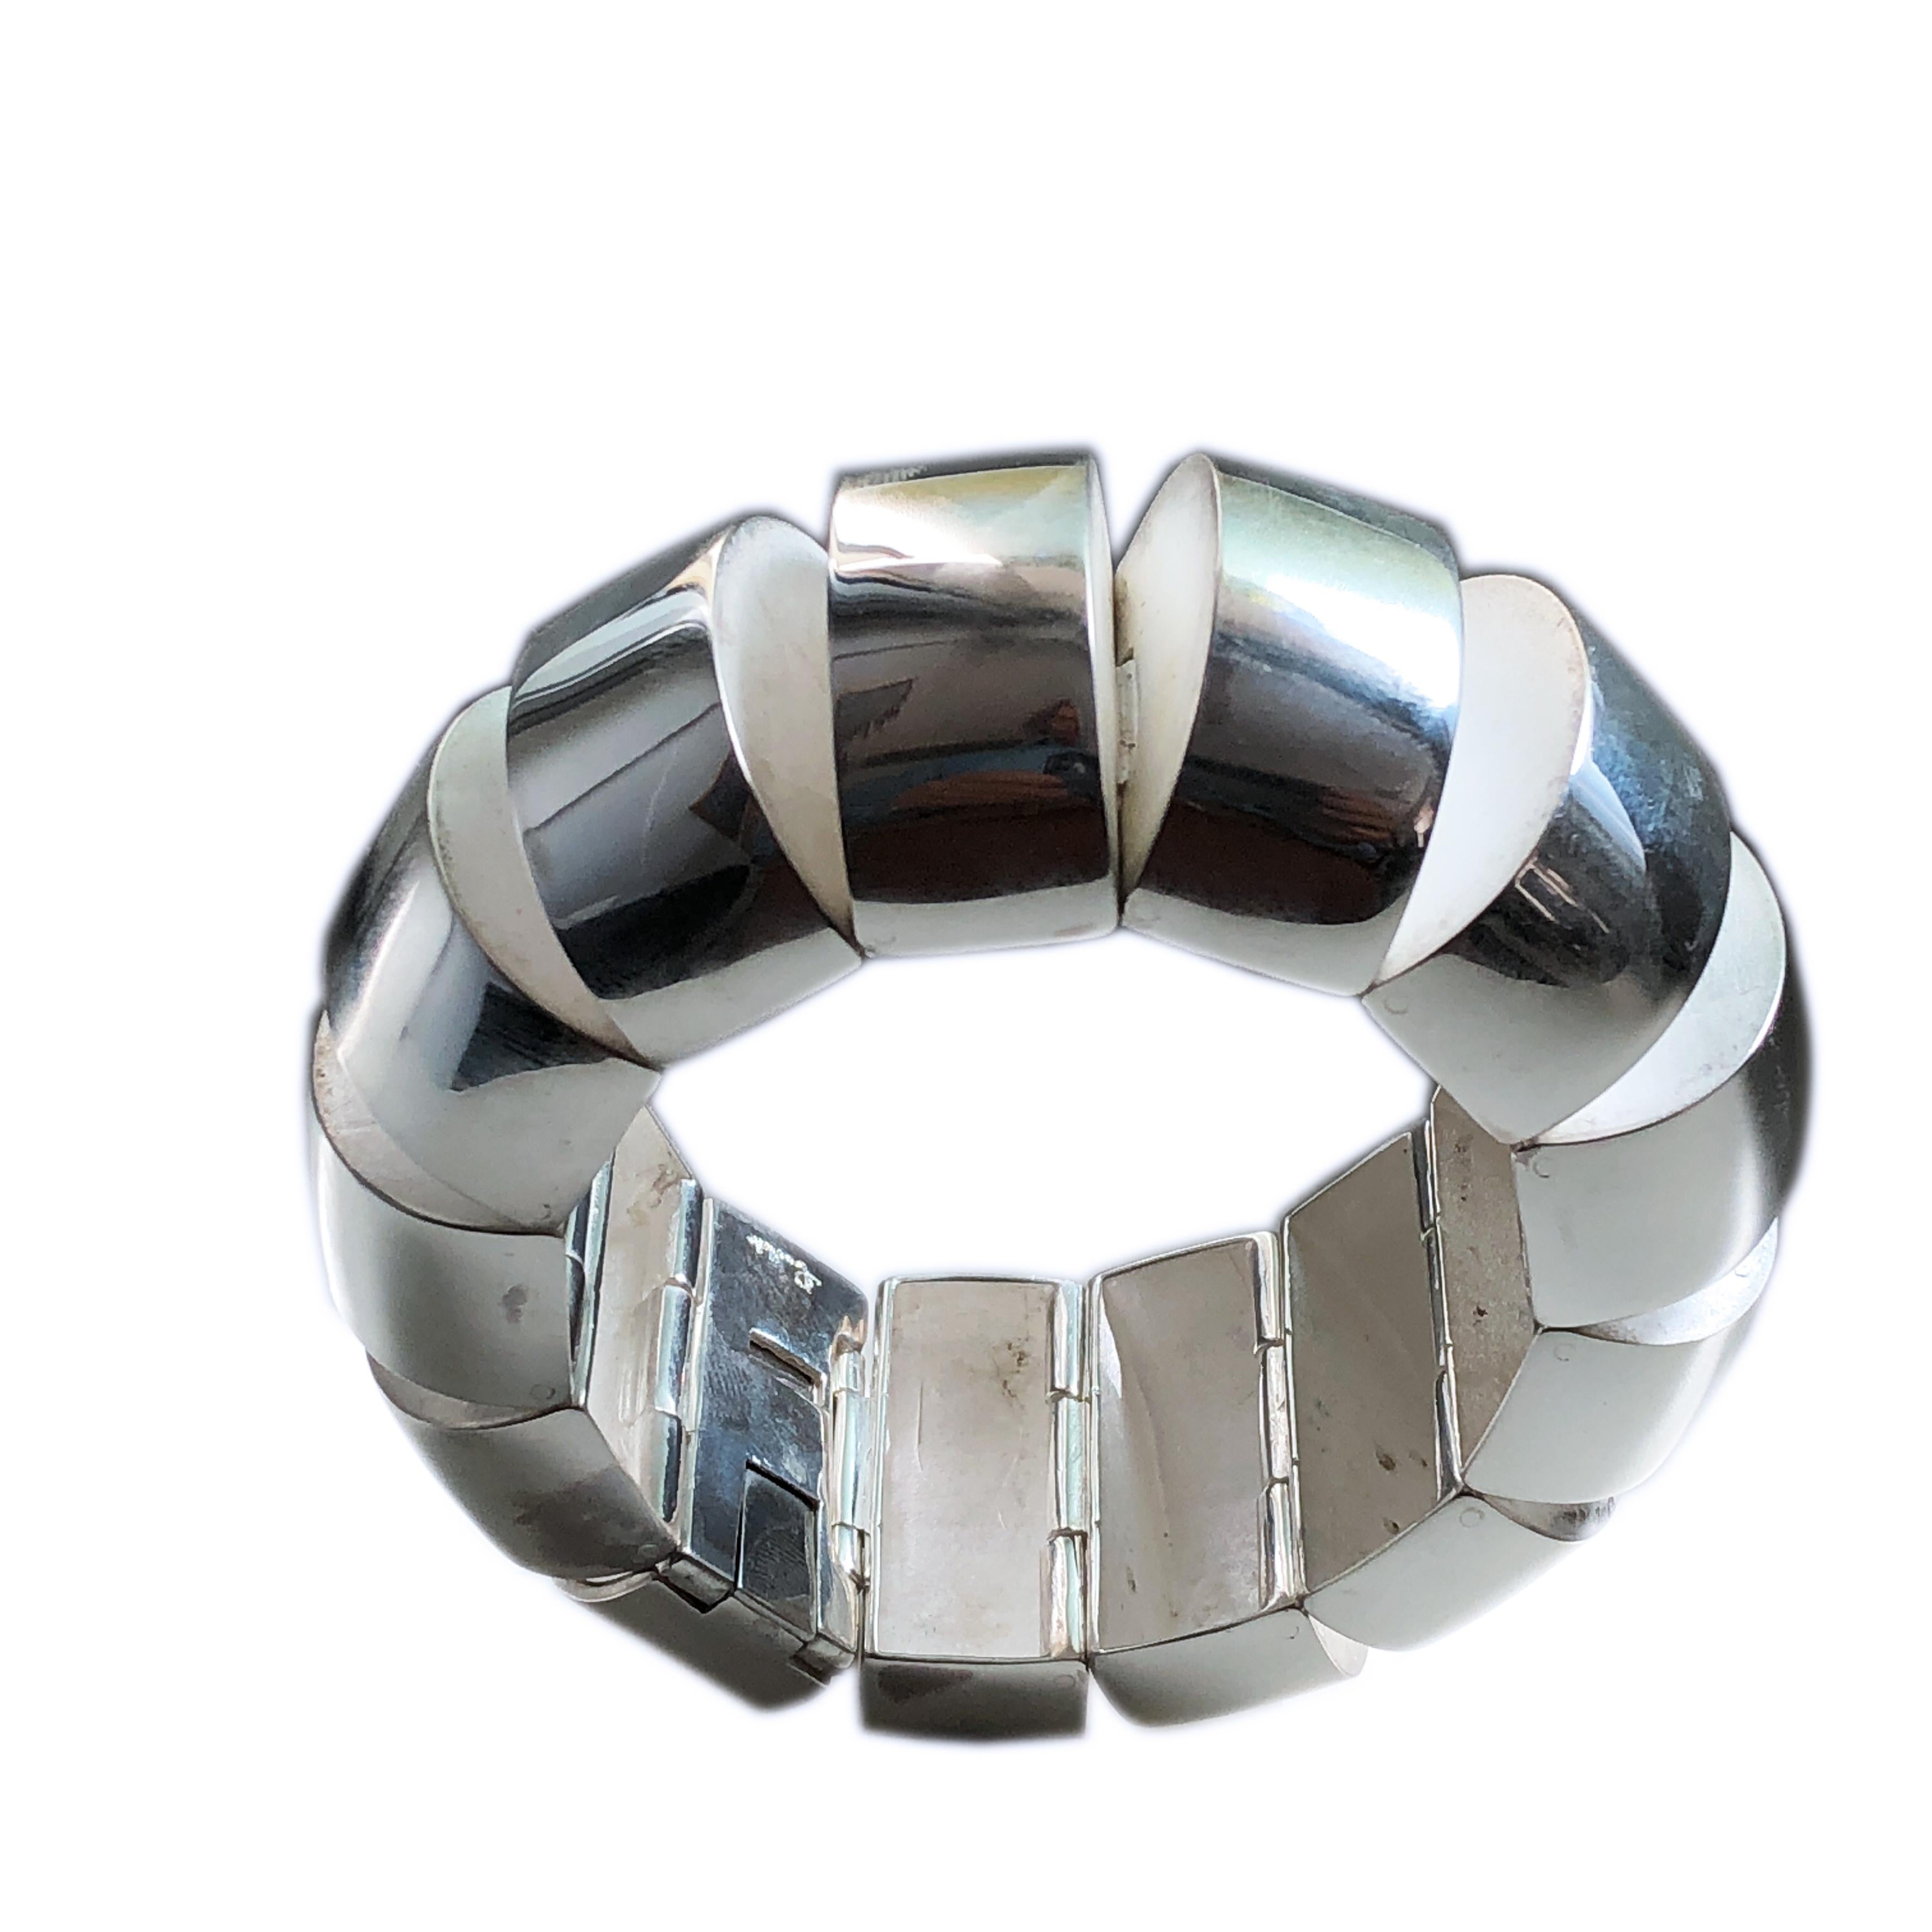 Extremely Rare, Stunning Sterling Silver Pomellato Bracelet: less than ten pieces of this Complicated, Sculptural Model were Hand Crafted in Pomellato Atelier in 1981. Massive in scale and in weight(6.48 OzT) this masterwork is a perfect marriage of